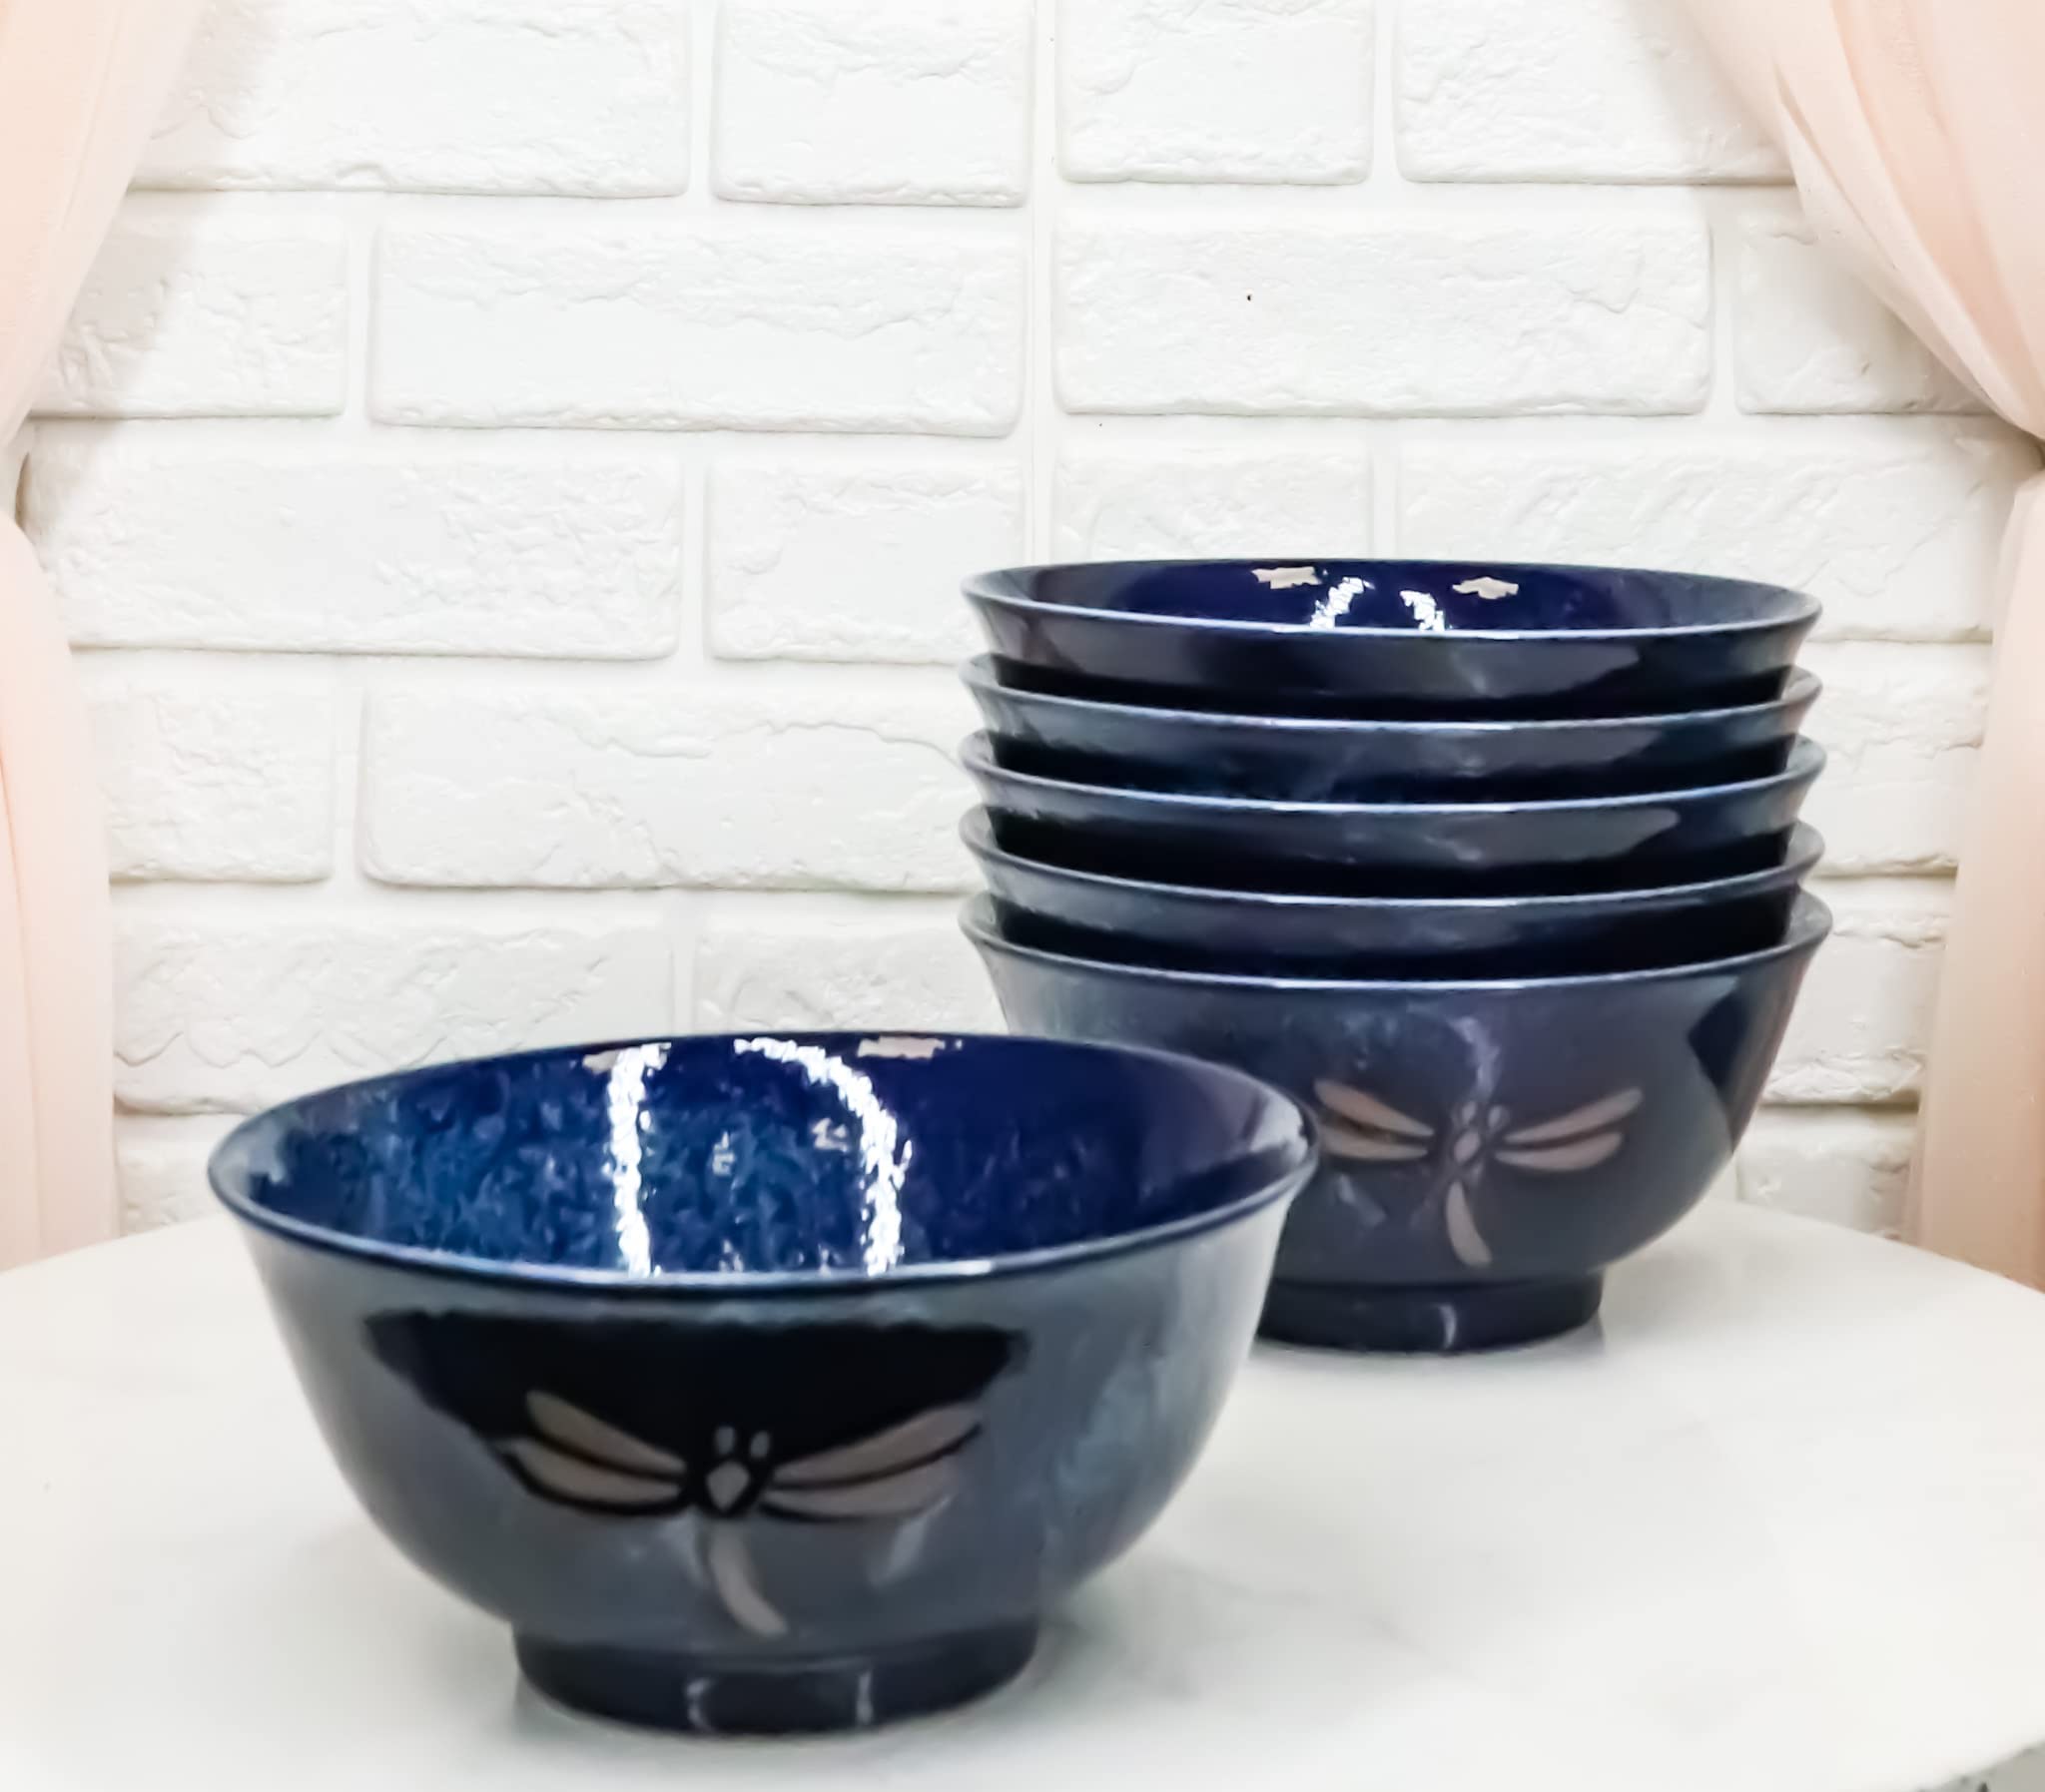 Ebros Gift Made in Japan Blue Tombo Dragonfly Design Ochawan Rice Soup Porcelain Bowls Set of 6 Home Decor Japanese Zen Fusion Asian Living Accent Housewarming Birthday Gifts Bowl Set